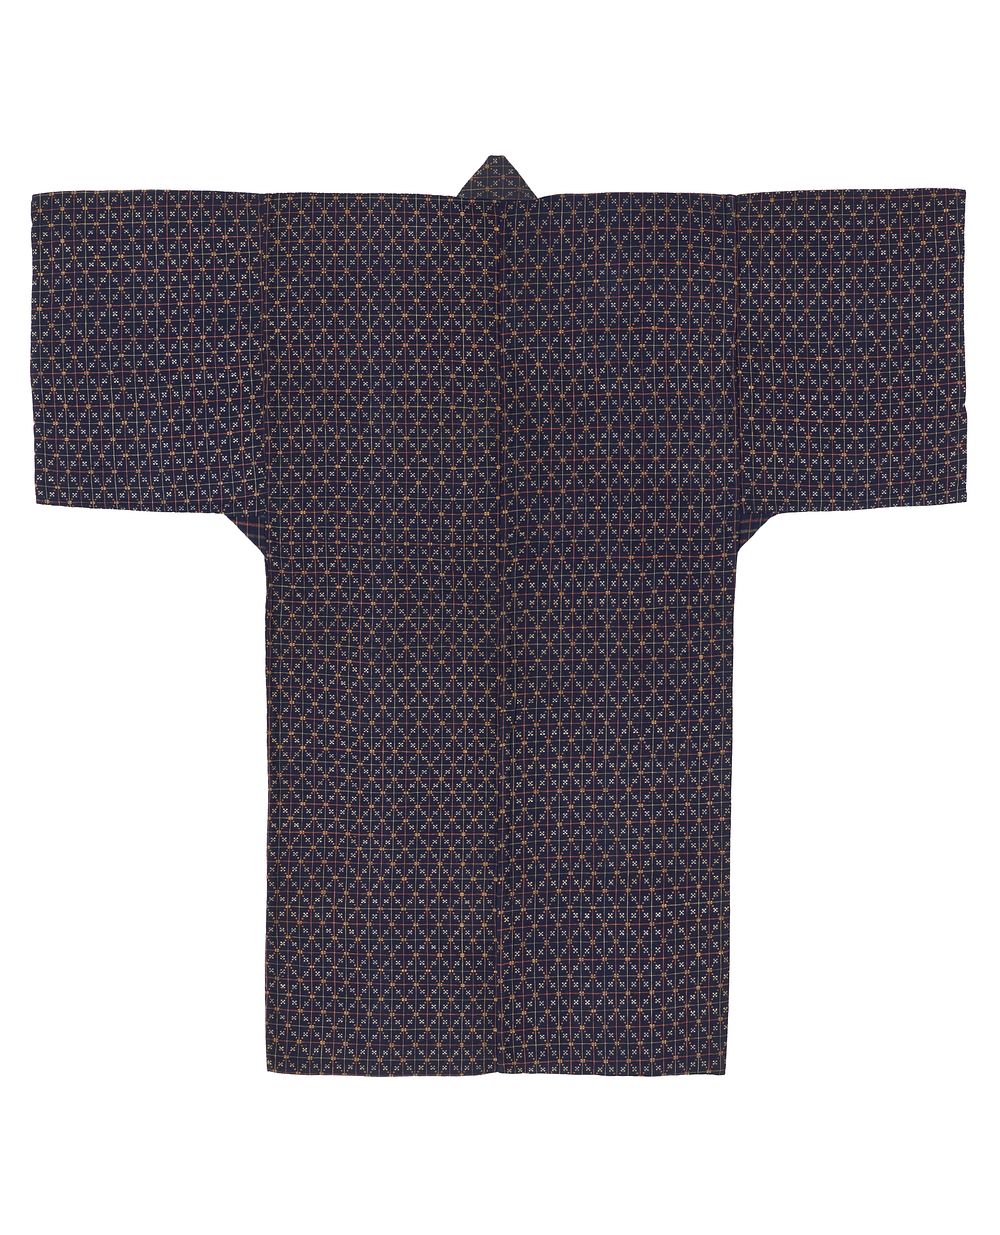 Navy blue robe with square and diamond pattern design and patterned linings; pink, orange, and white square and diamond…